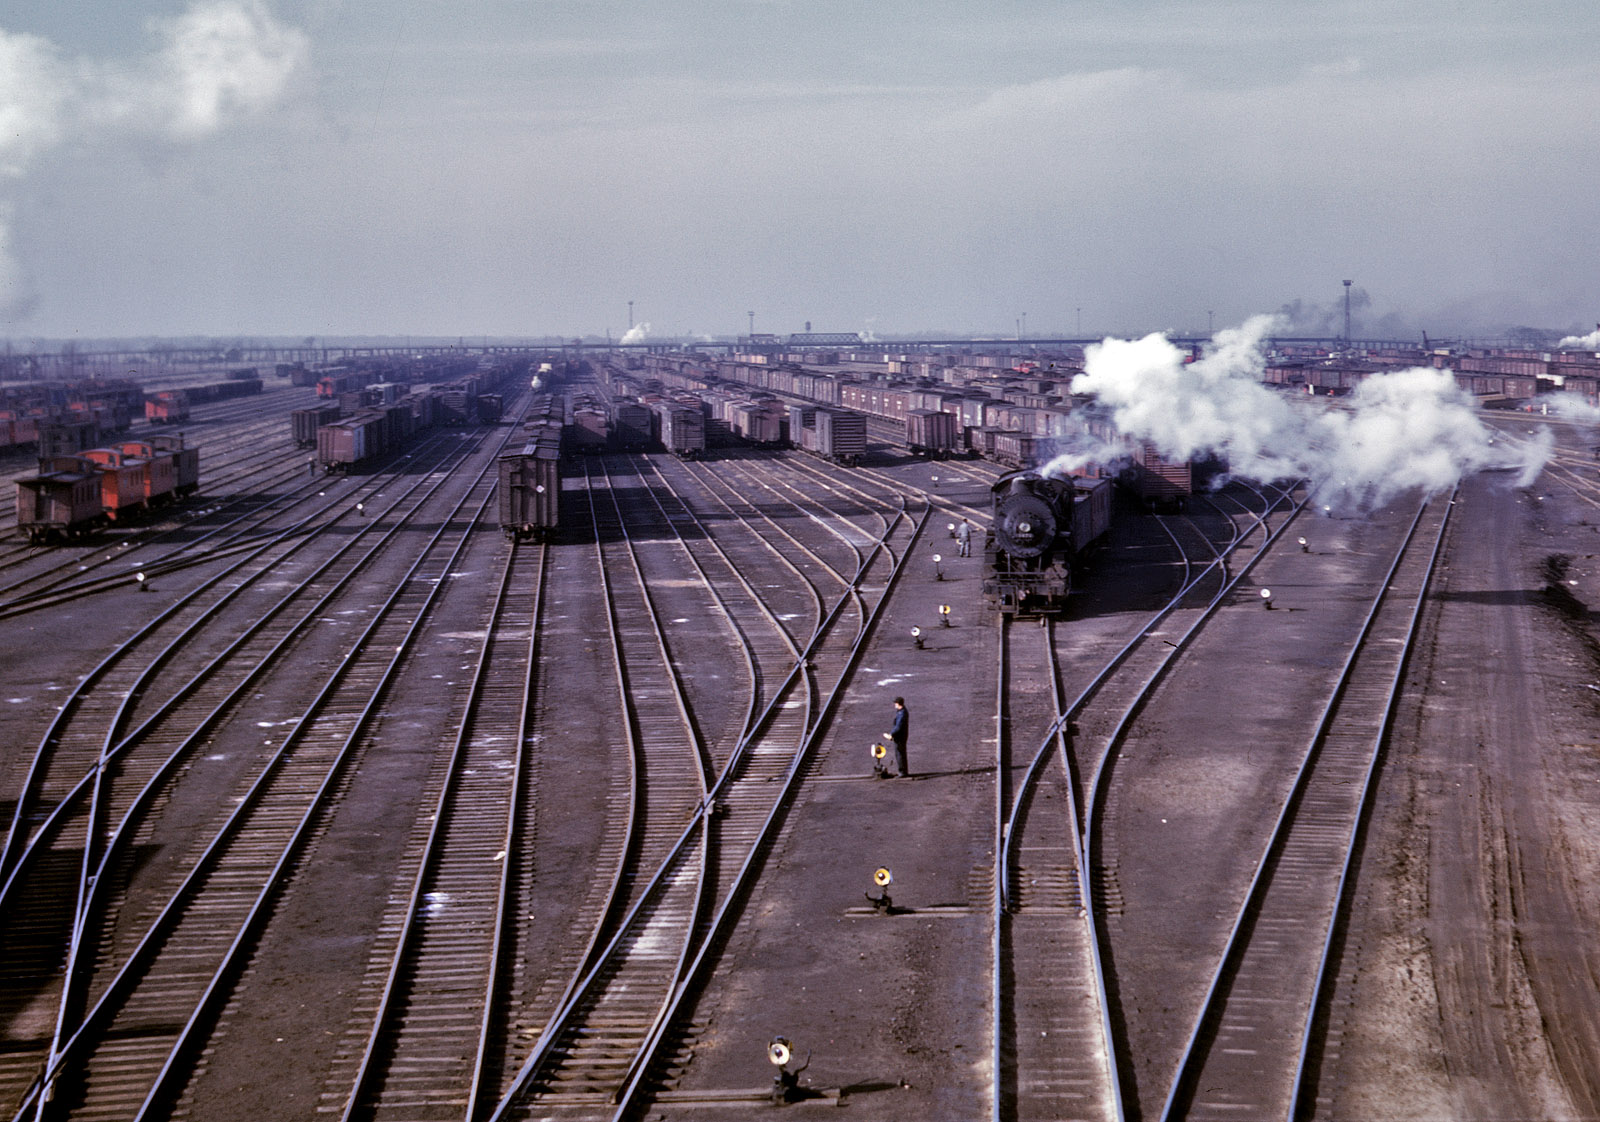 December 1942. General view of the C&NW R.R. Proviso classification yard at Chicago. View full size. 4x5 Kodachrome transparency by Jack Delano.